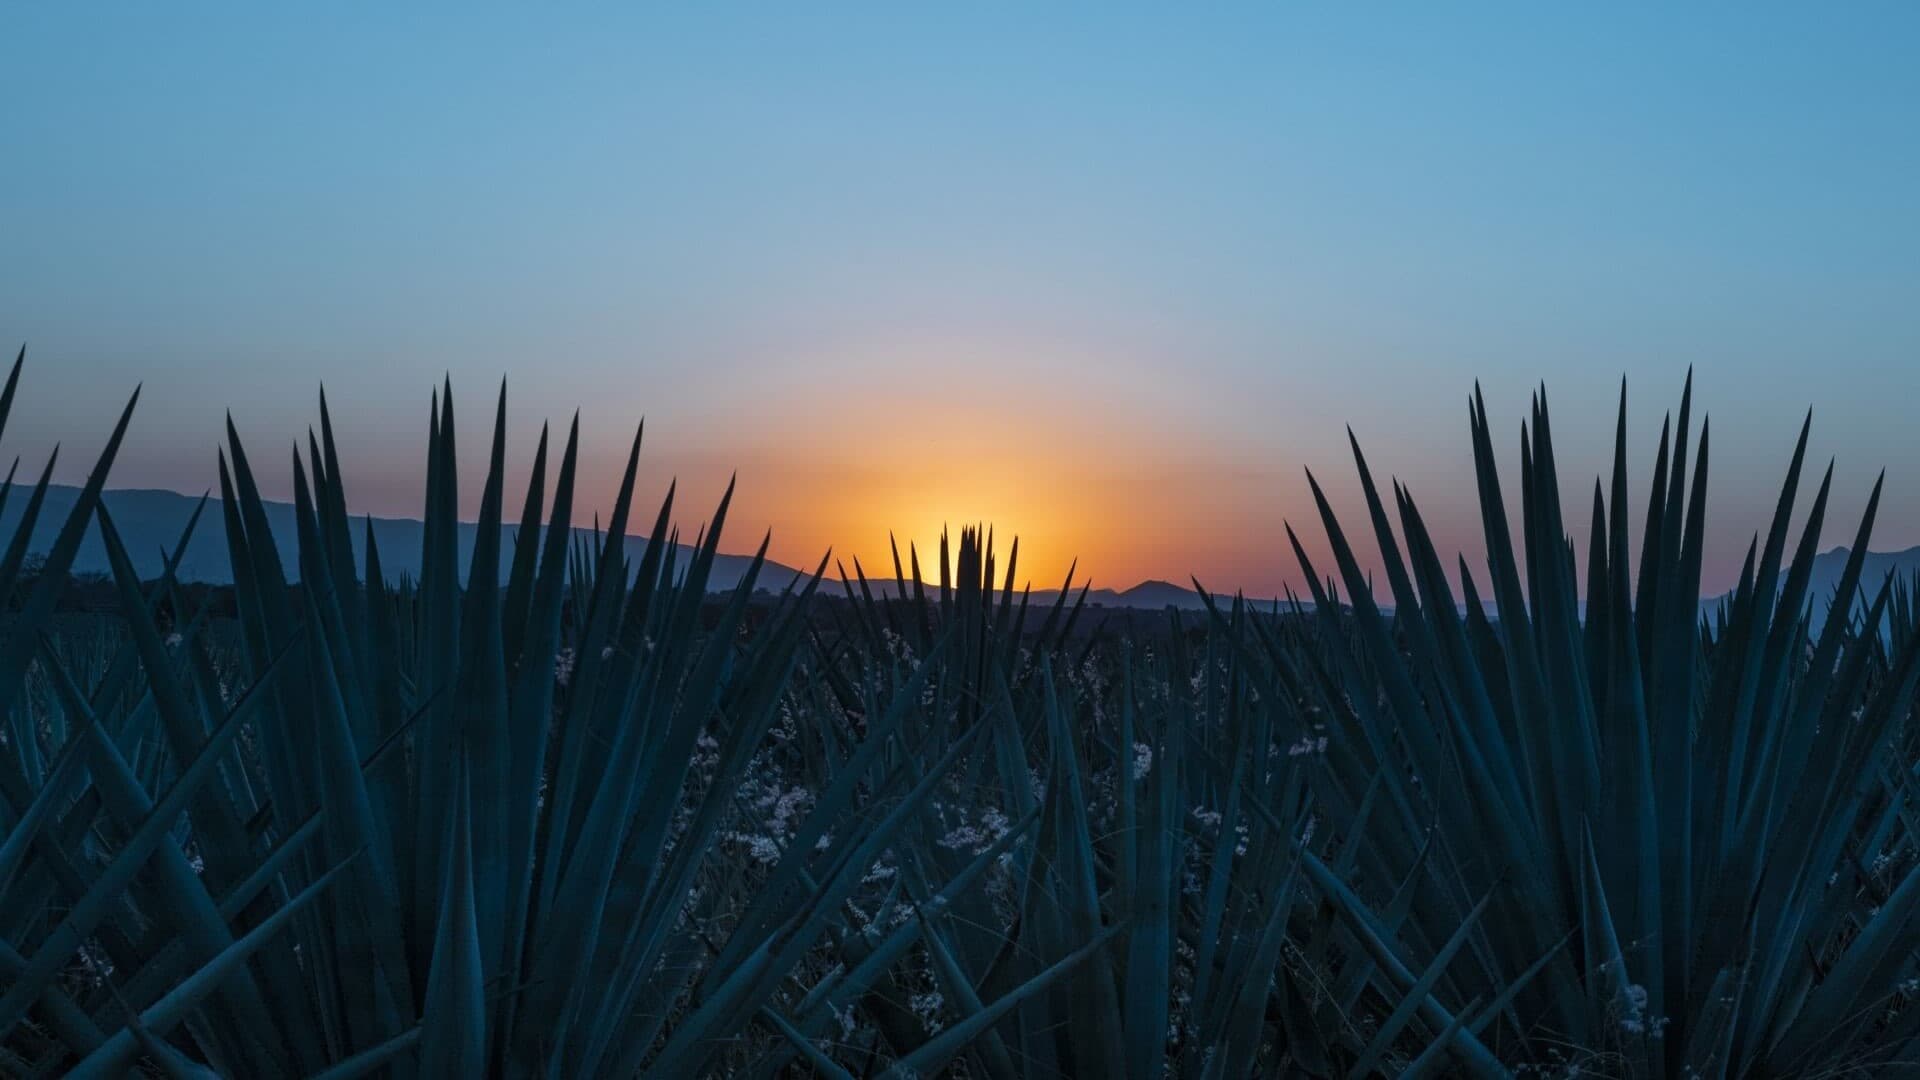 Blue agave silhouetted against an orange sunset